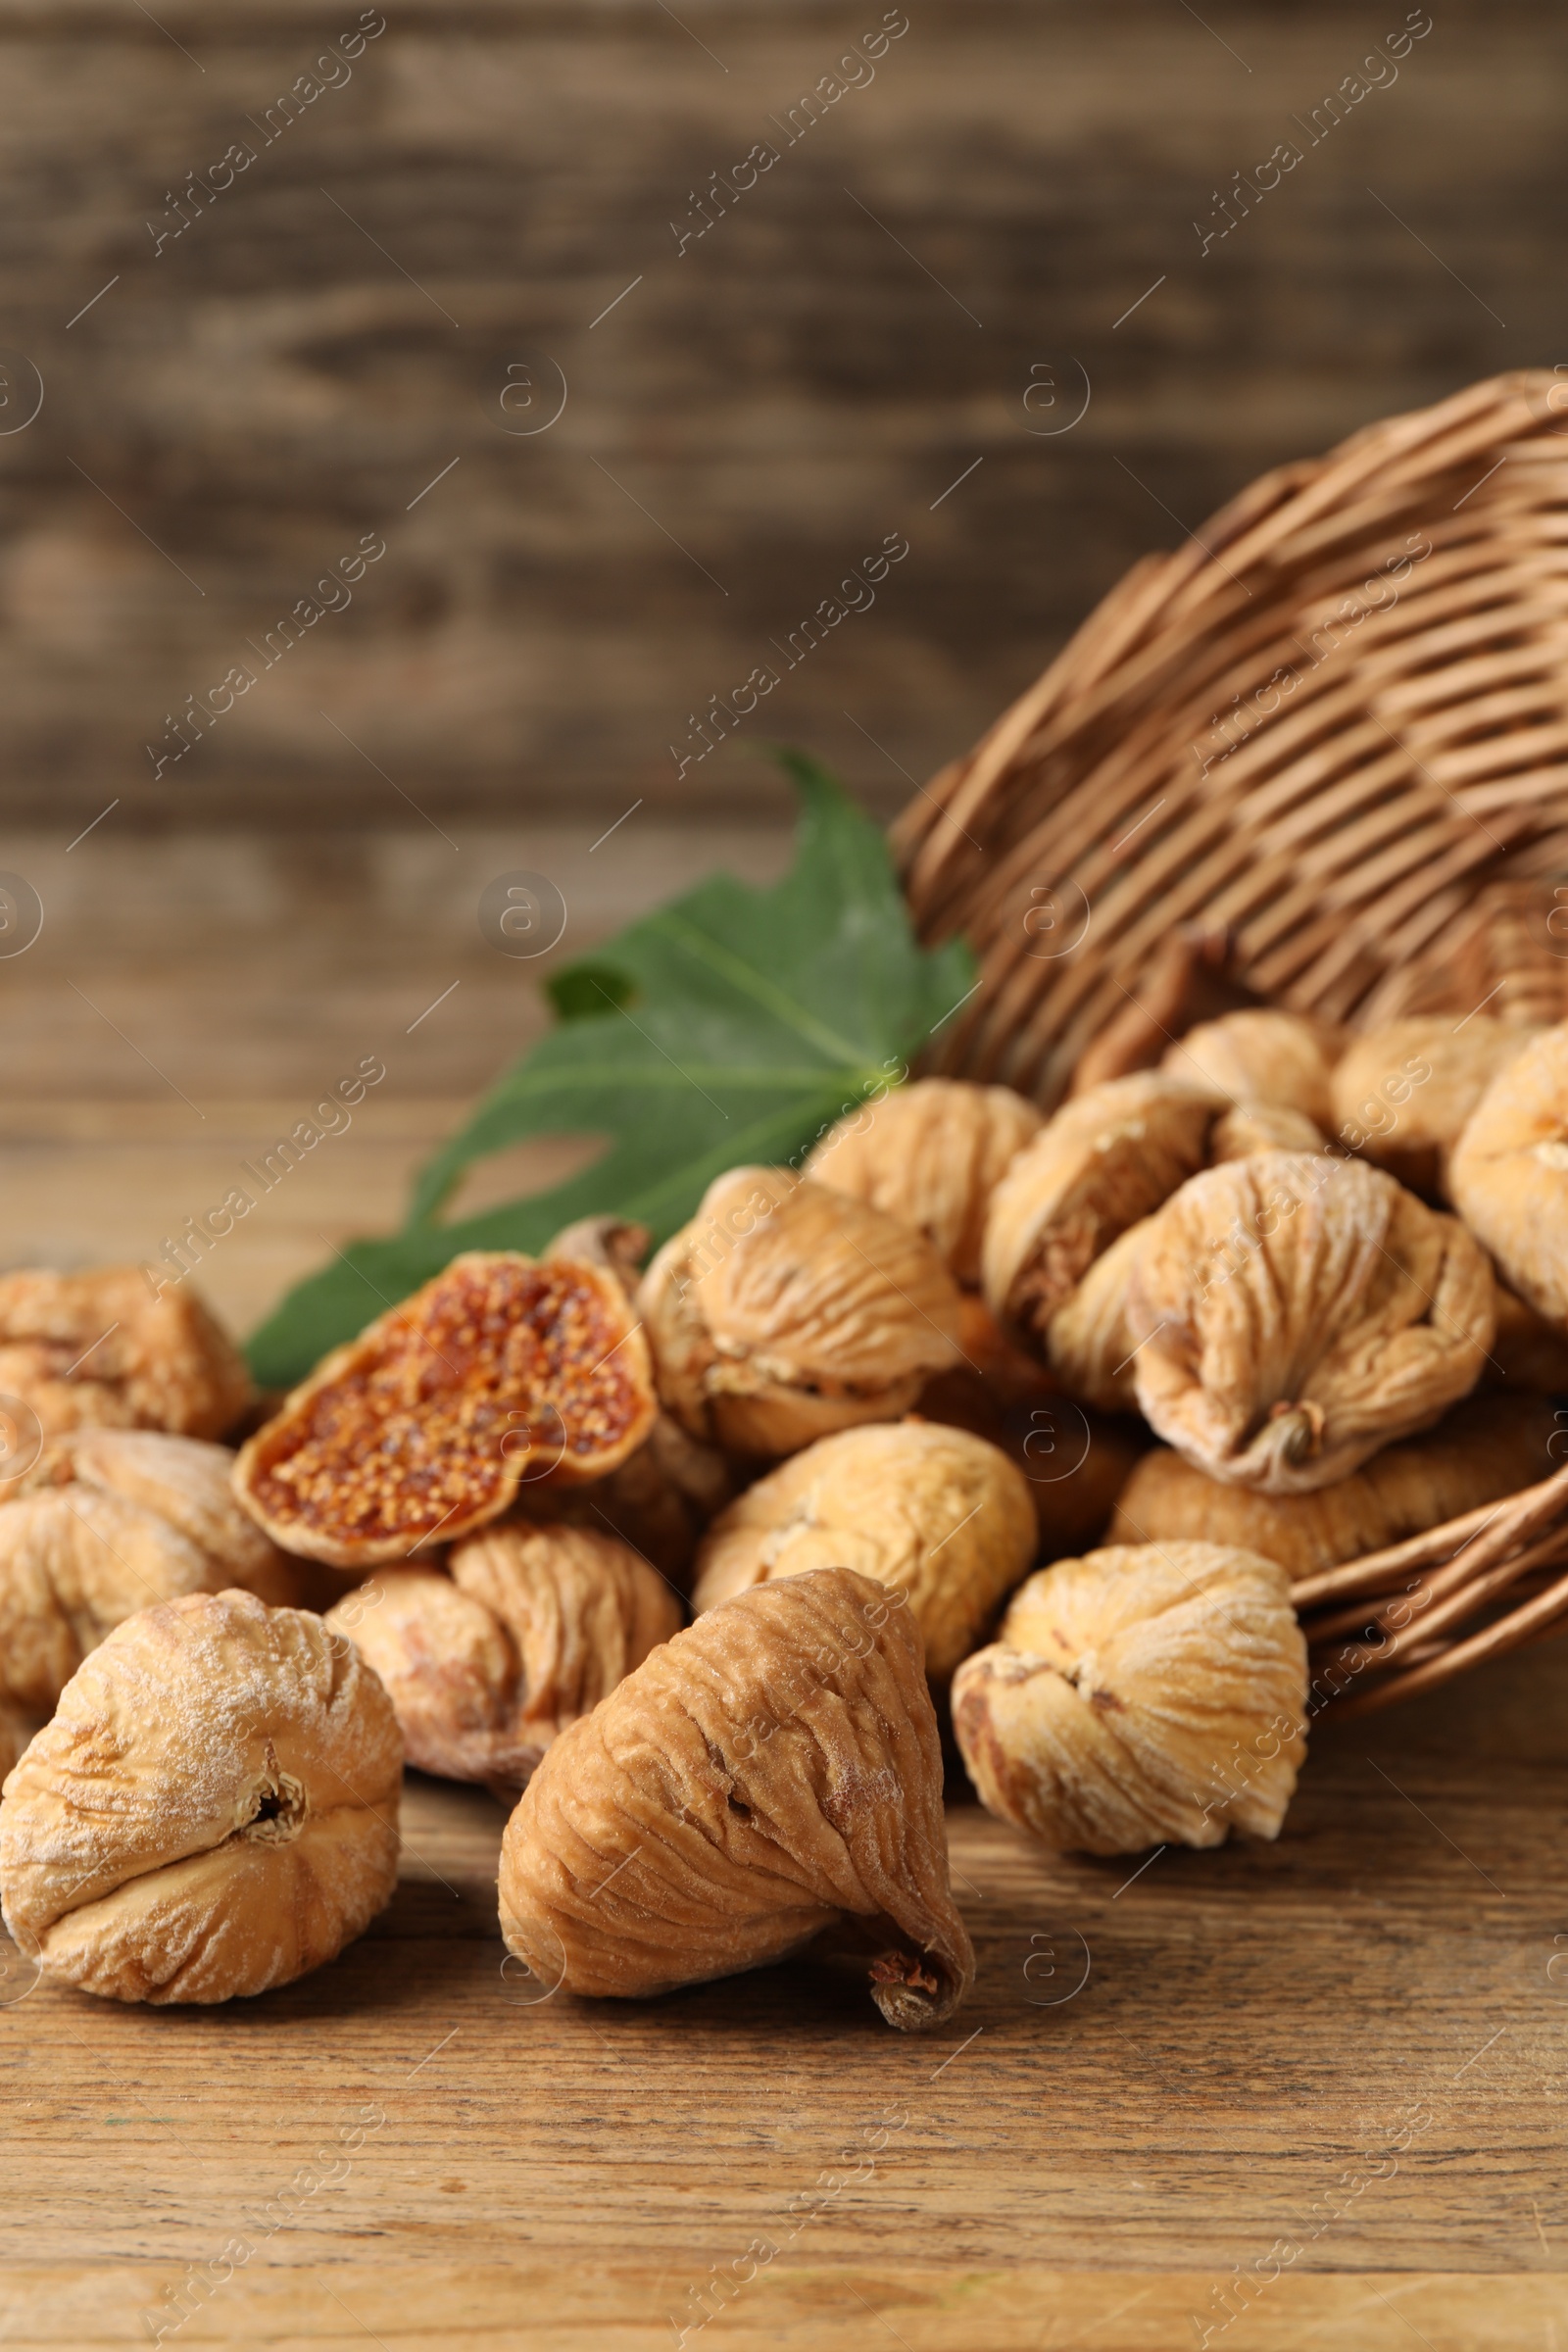 Photo of Overturned wicker basket, dried figs and green leaf on wooden table, closeup